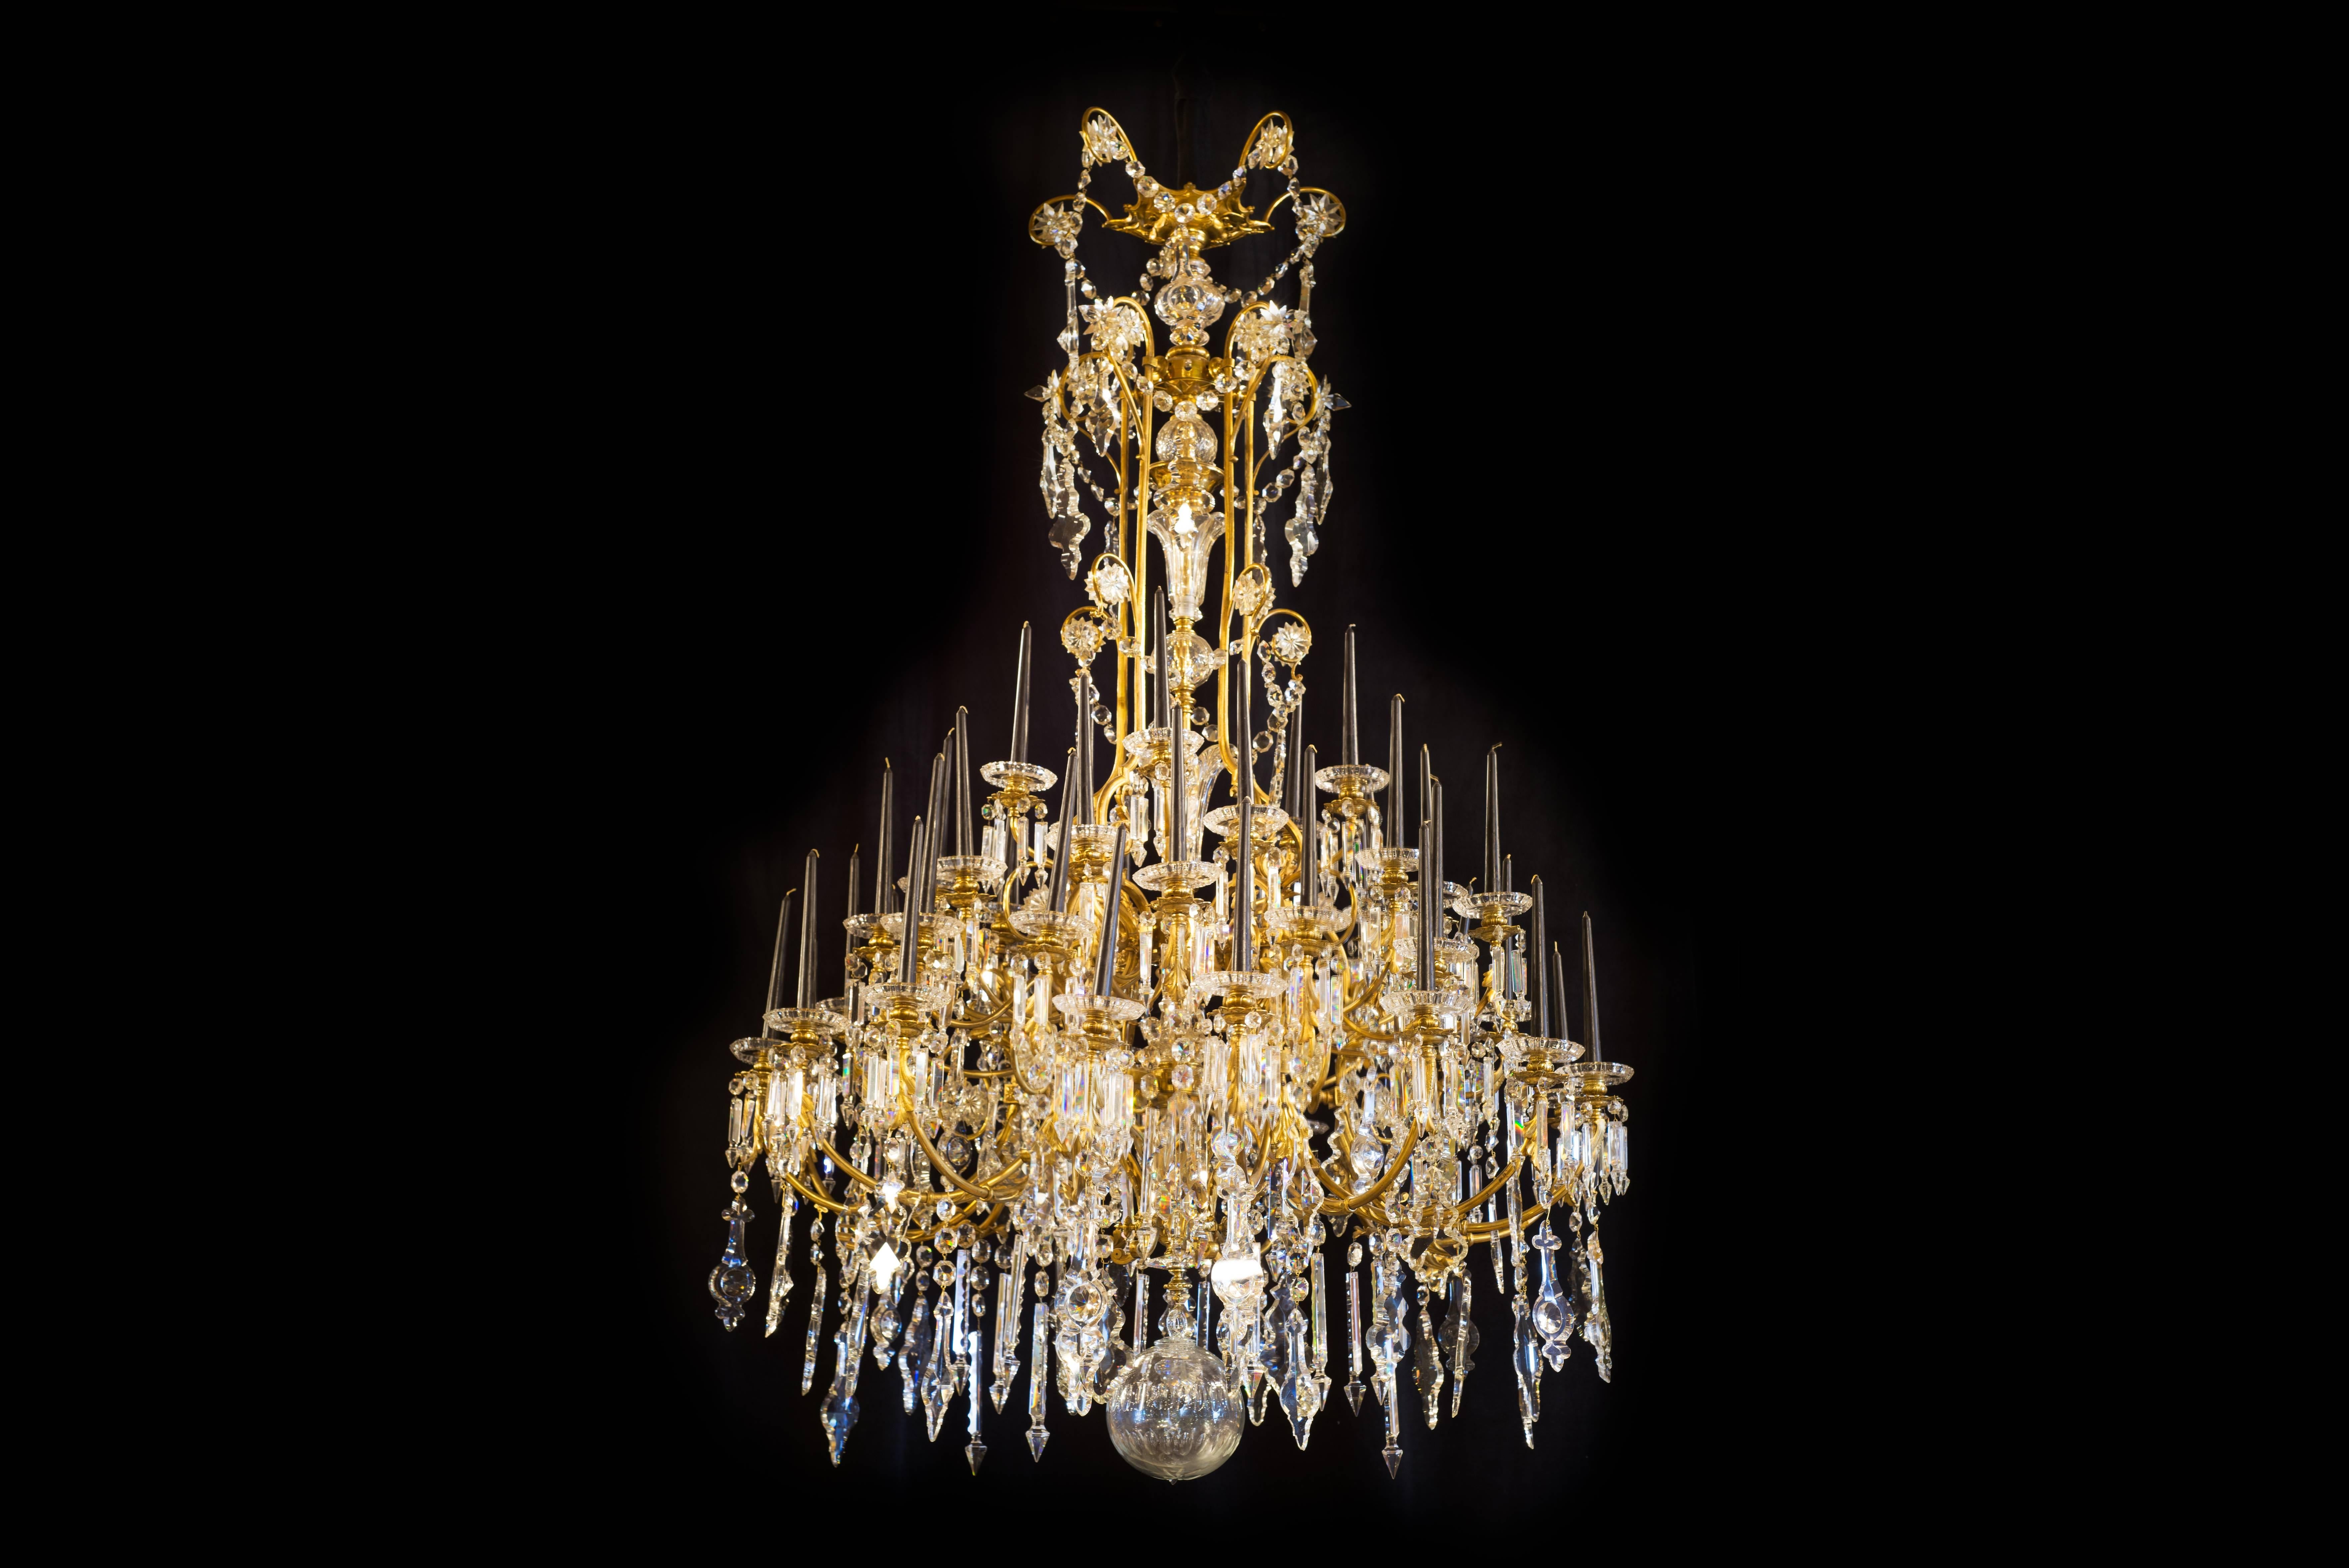 19th century chandelier - column and arms made of bronze. 

Baccarat crystal glass bells and cups. Over 15 different shapes of crystal. 

Forty four points of light - one candle for each point. 

The chandelier was overhauled 6 years ago and